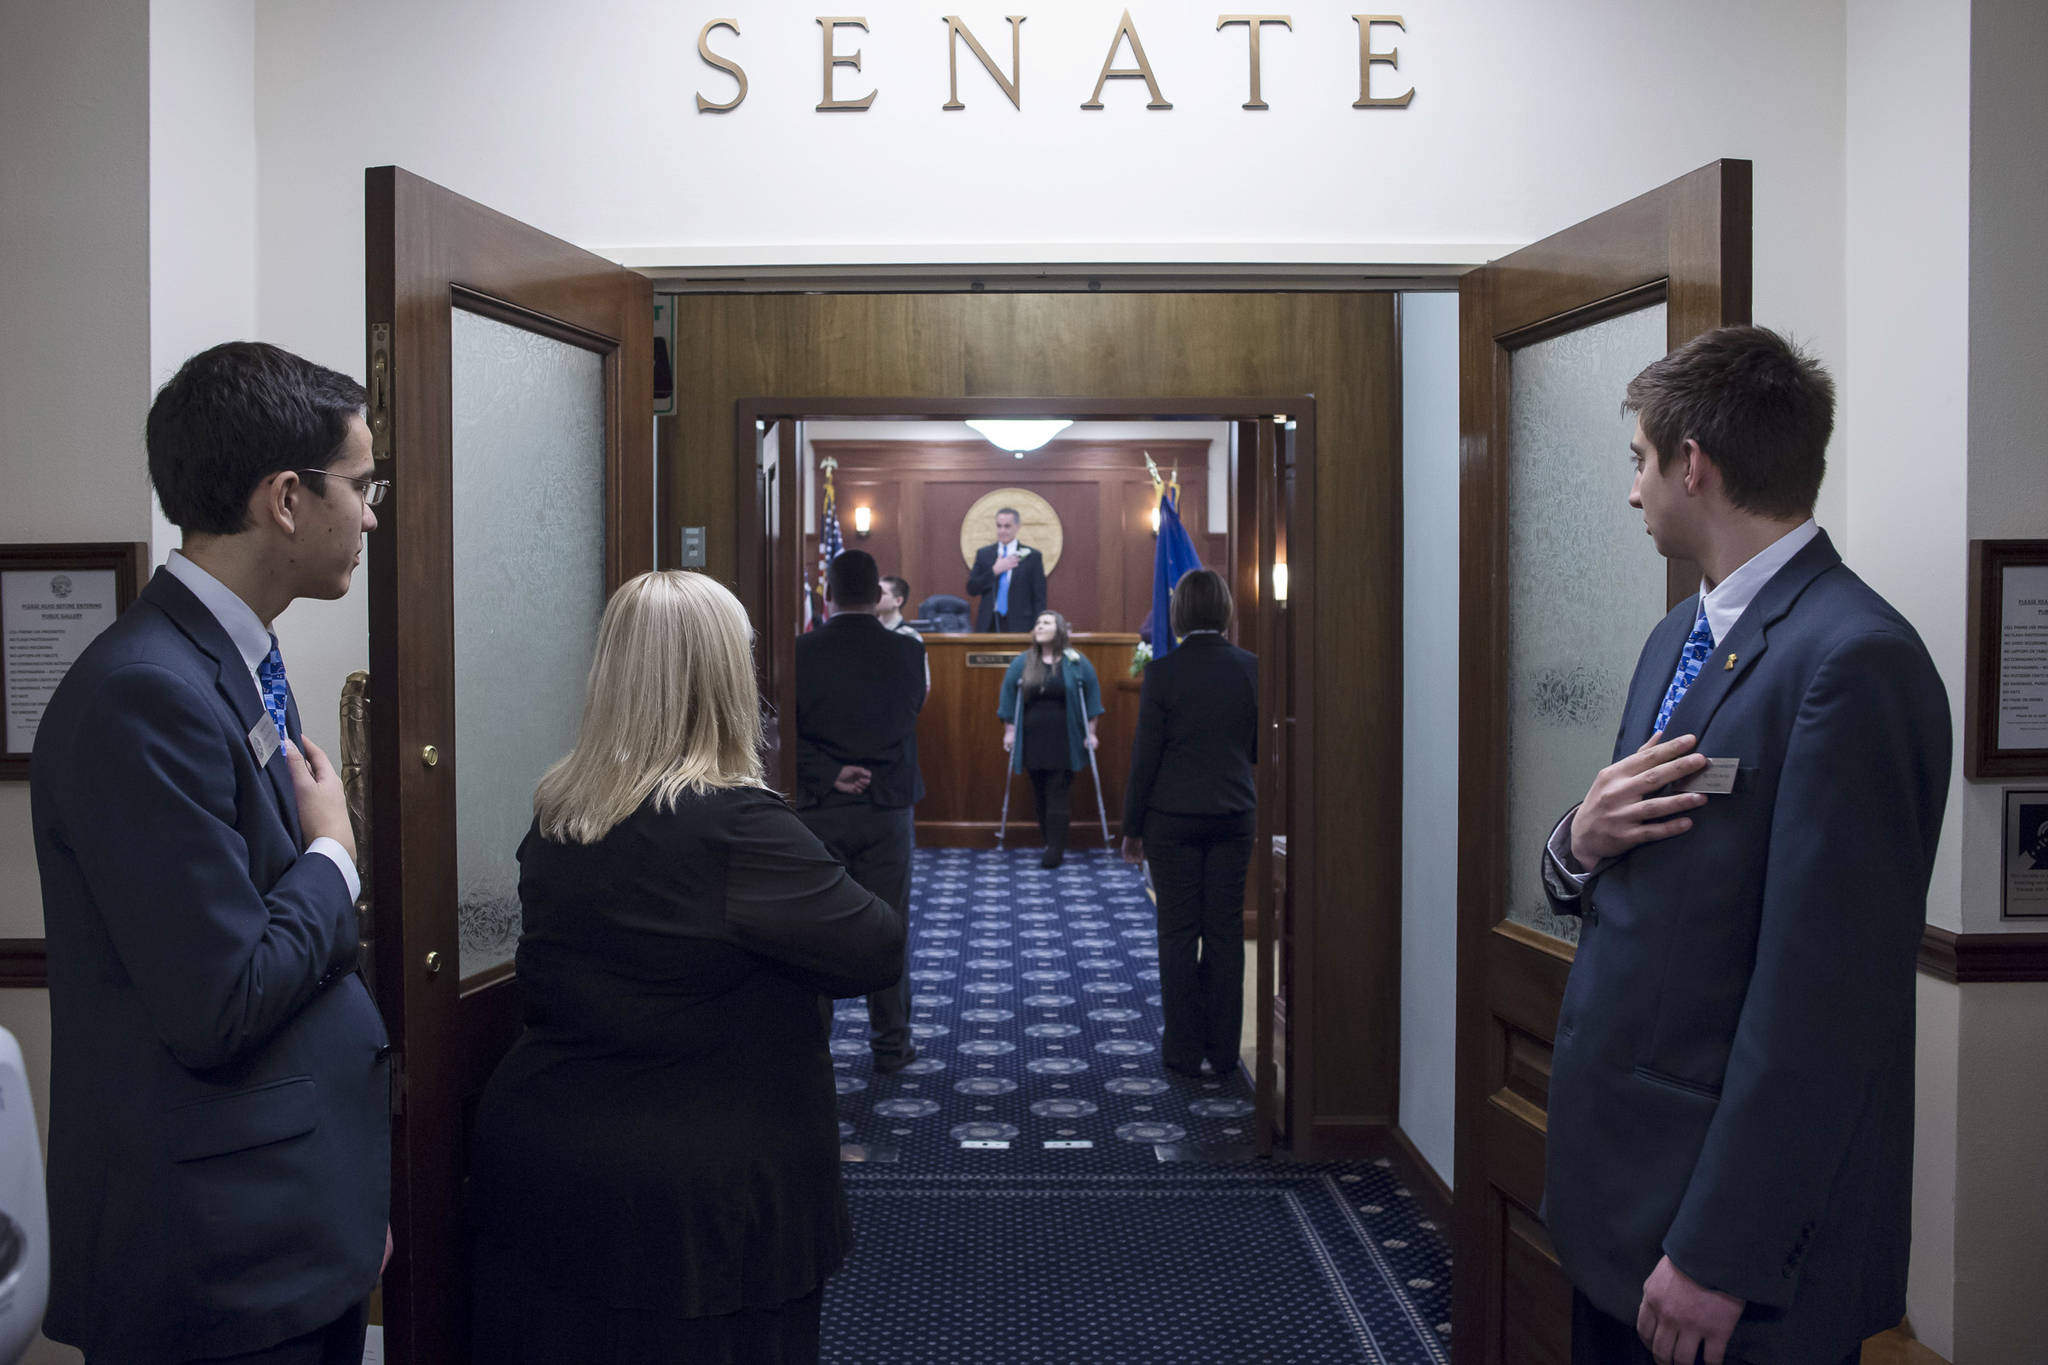 Alyssa Fischer sings in the Senate on the opening day of the 31st Session of the Alaska Legislature on Tuesday, Jan. 15, 2019. (Michael Penn | Juneau Empire)